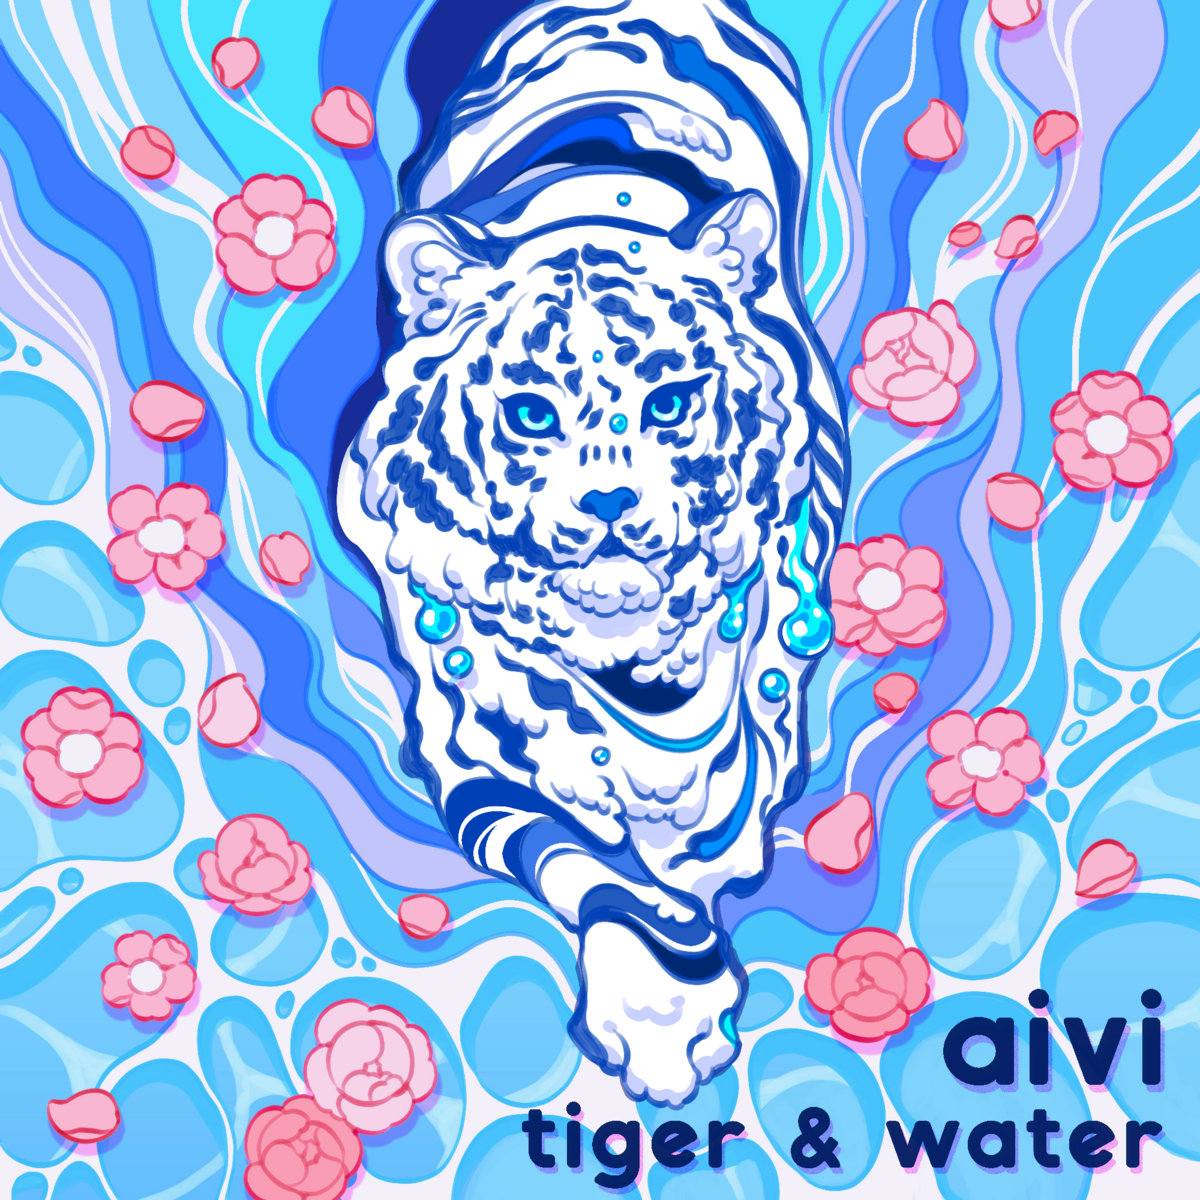 tiger & water by aivi